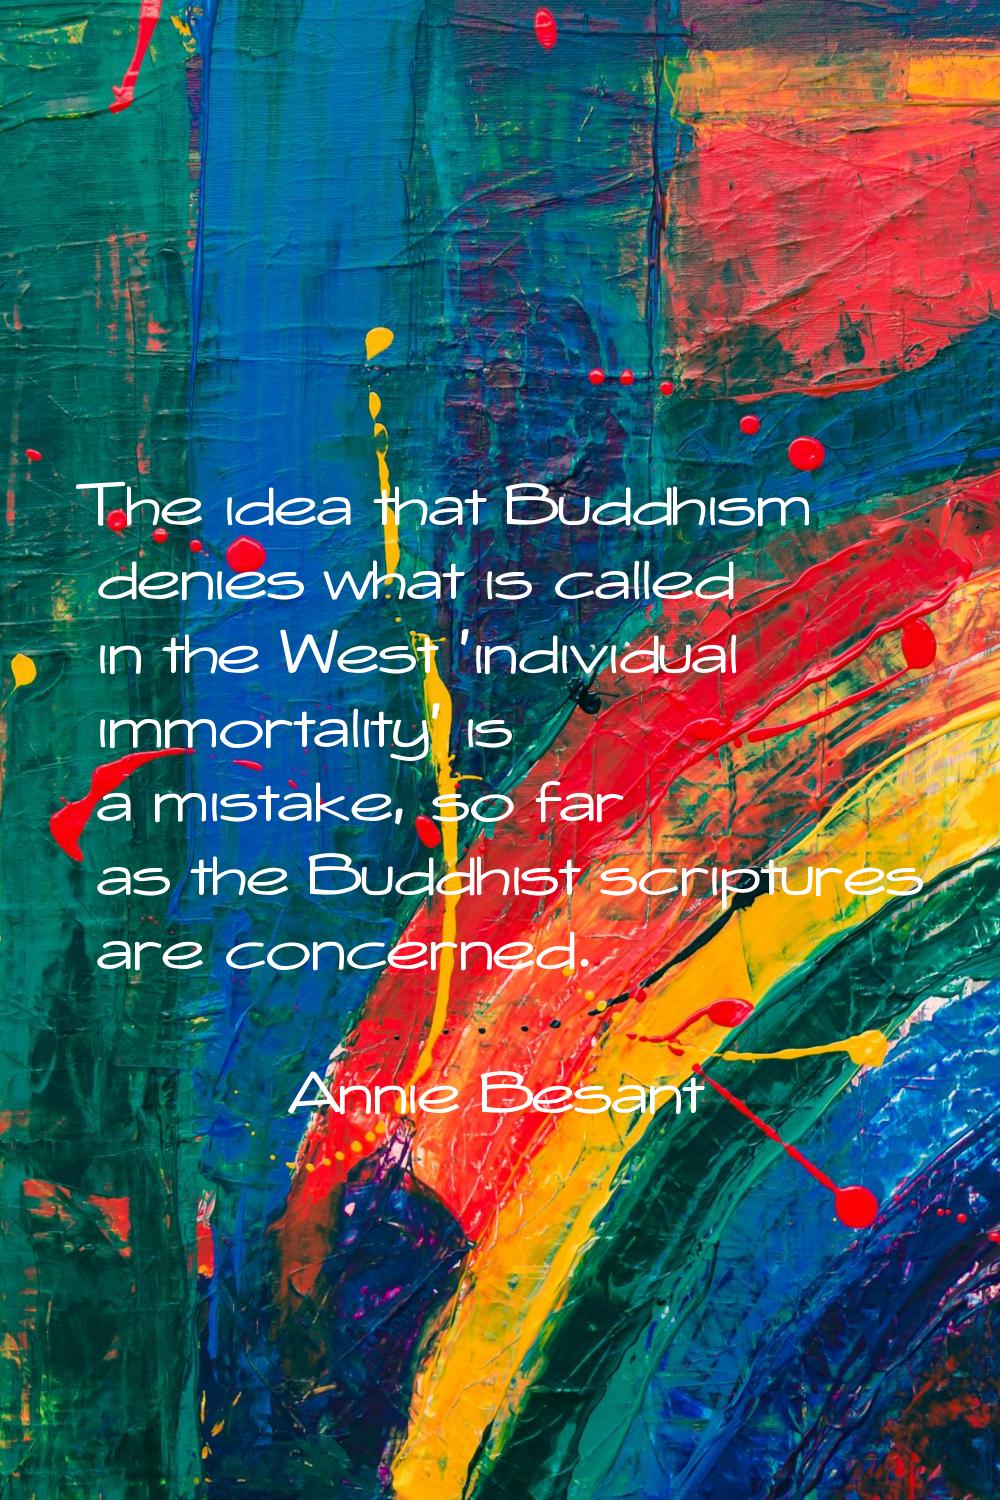 The idea that Buddhism denies what is called in the West 'individual immortality' is a mistake, so 